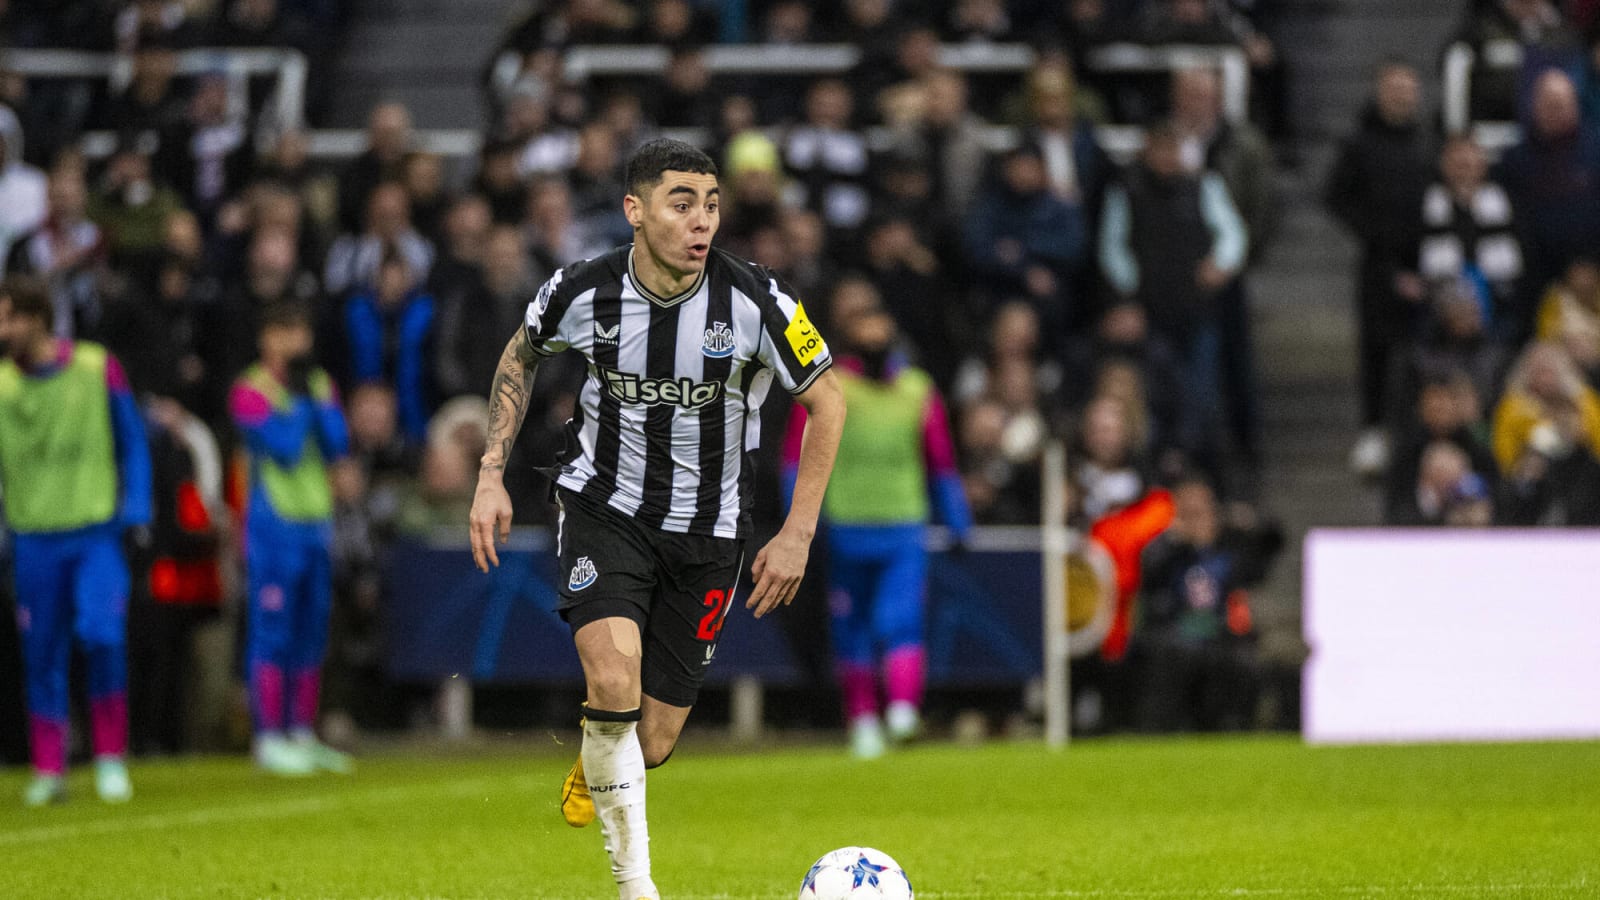 Newcastle reach provisional agreement with Saudi club for 29-year-old fan favourite